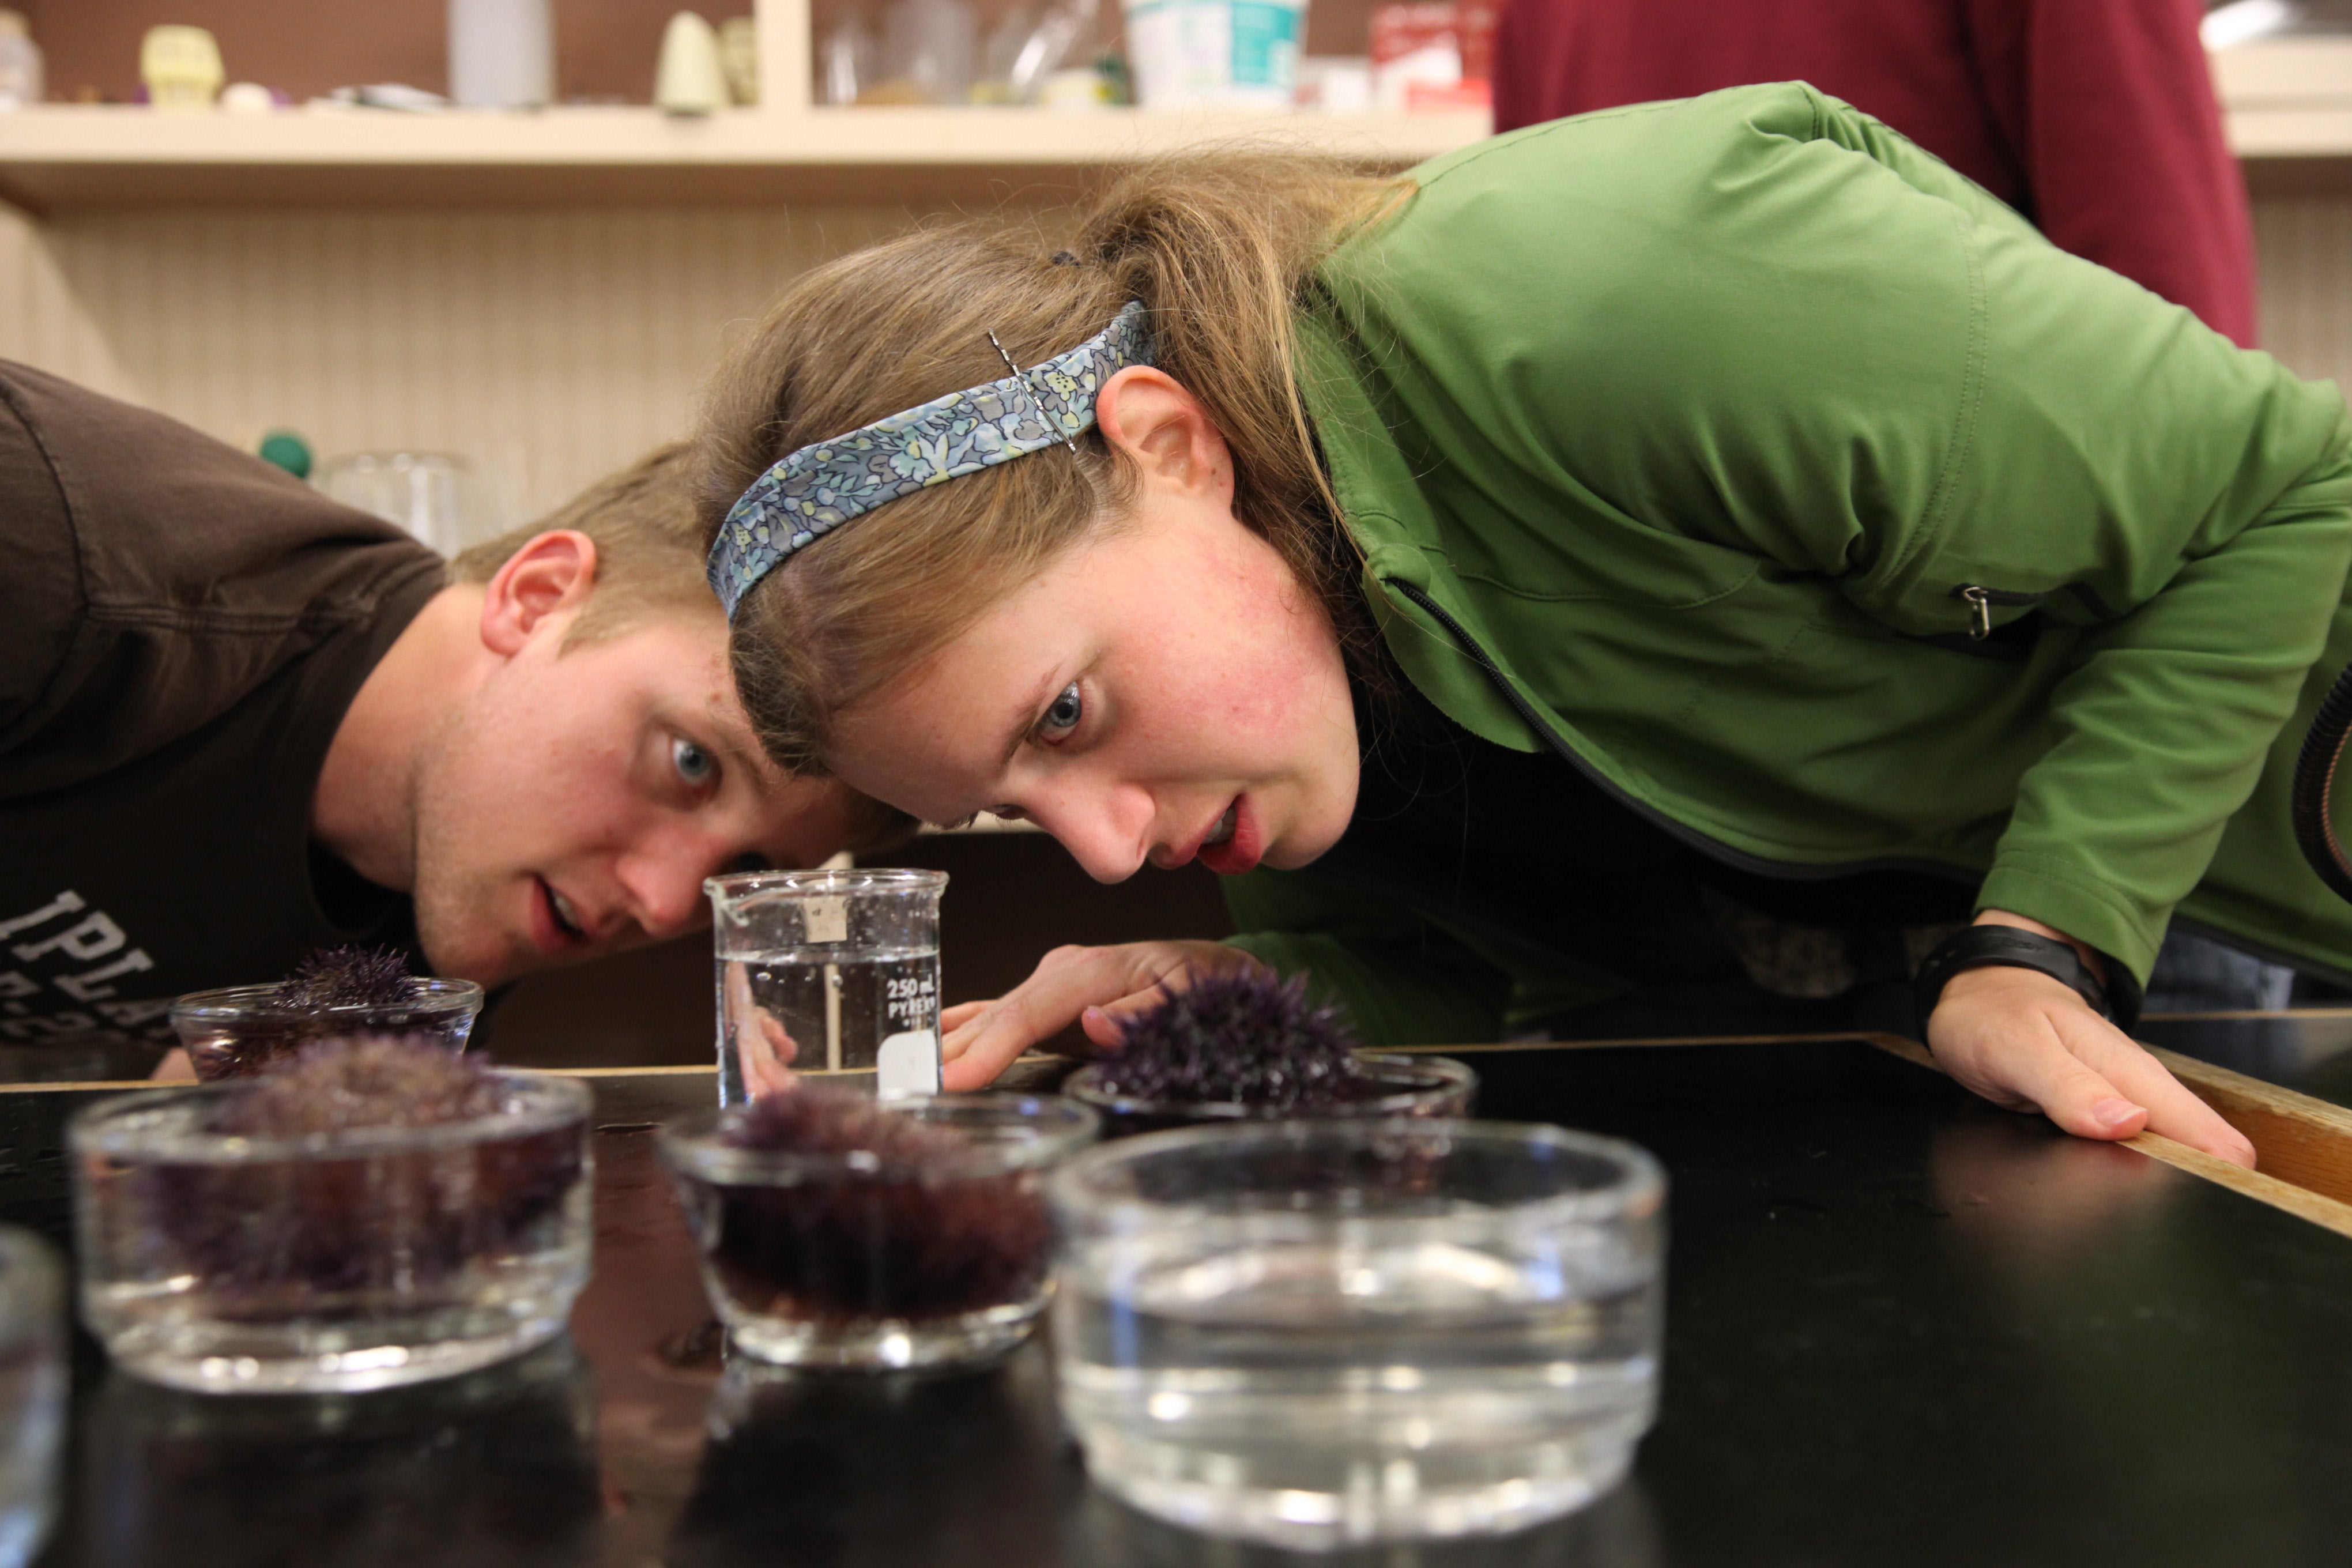 A man and woman working together in a lab setting looking at a purple sea urchin in a petri dish.